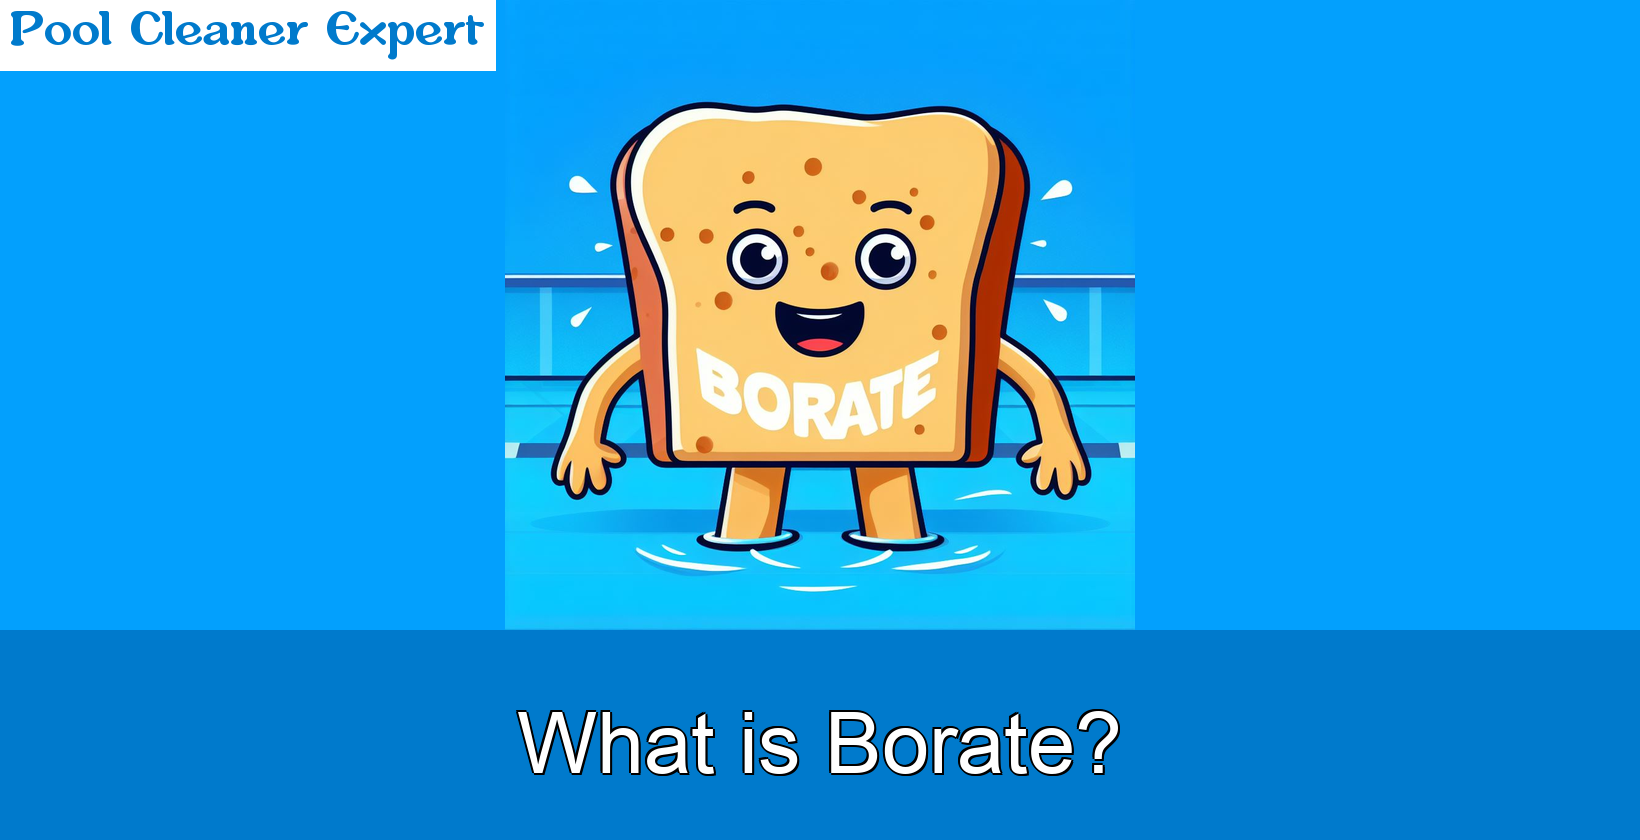 Borate in Pools: All You Need to Know